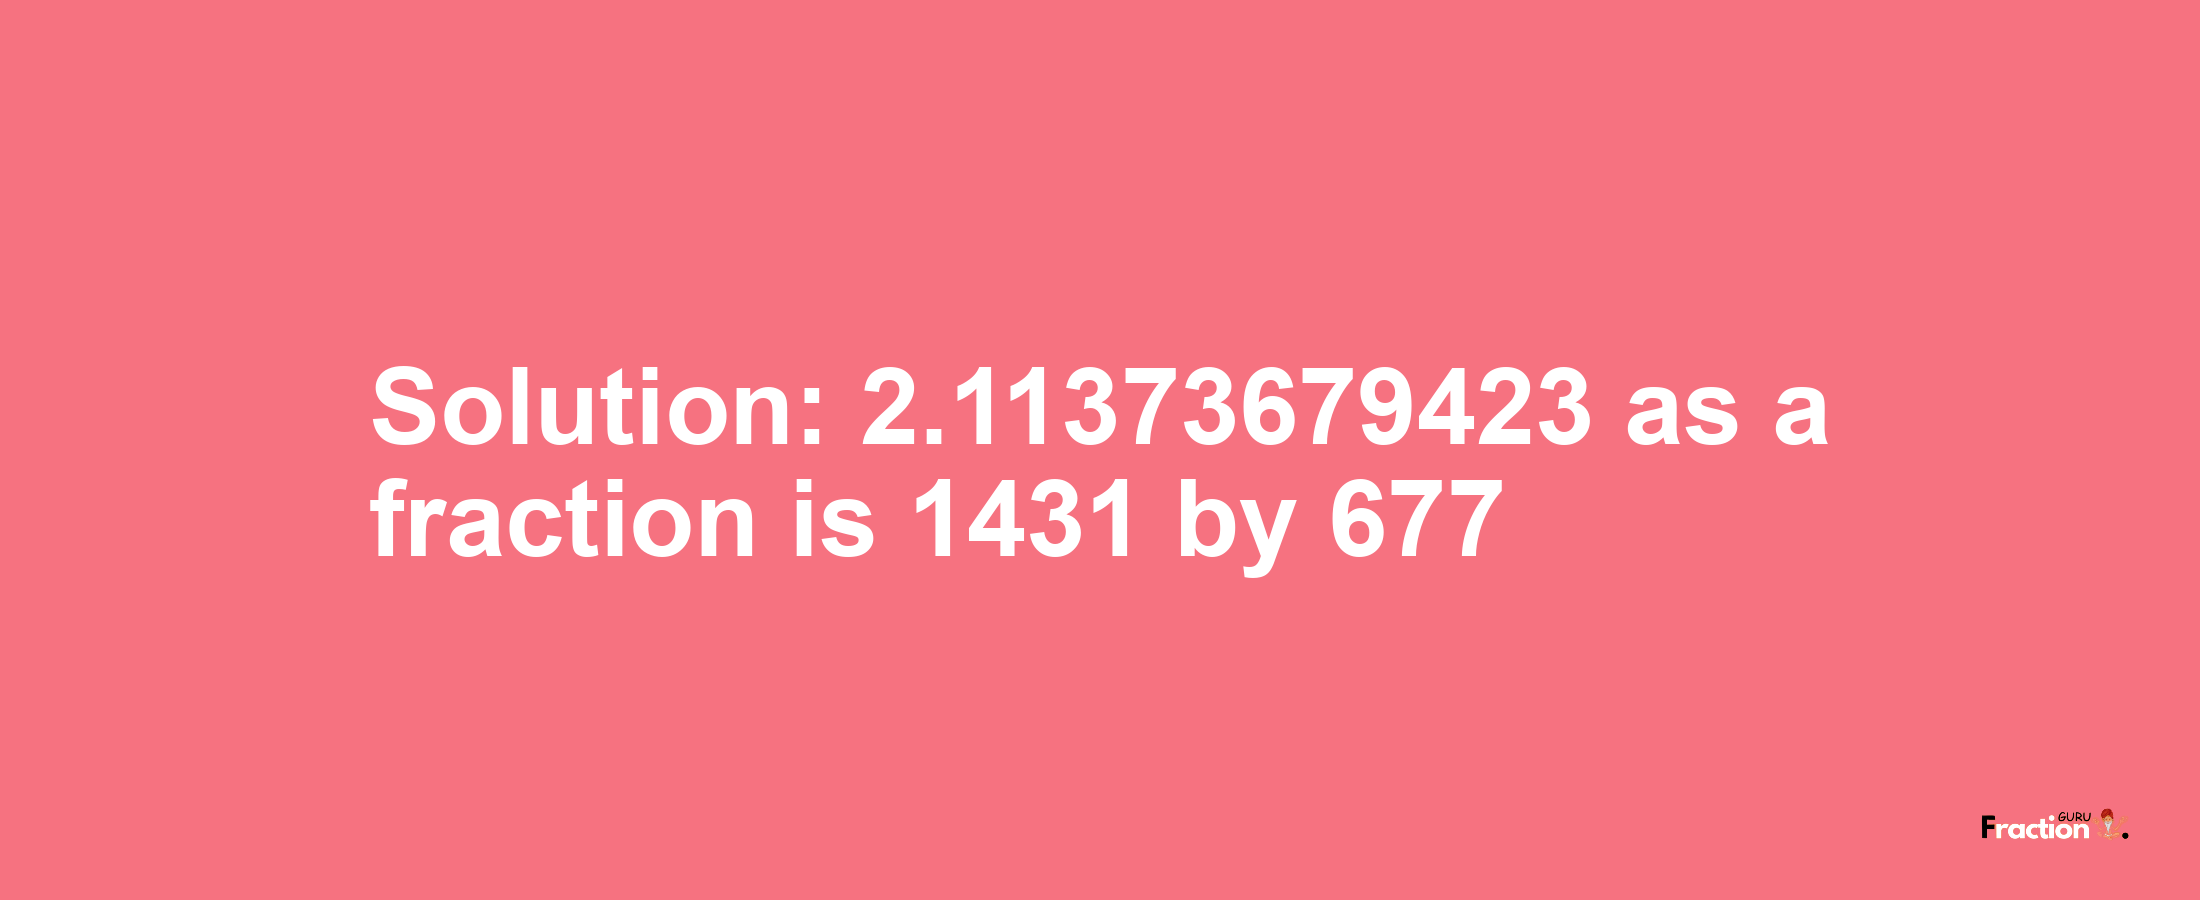 Solution:2.11373679423 as a fraction is 1431/677